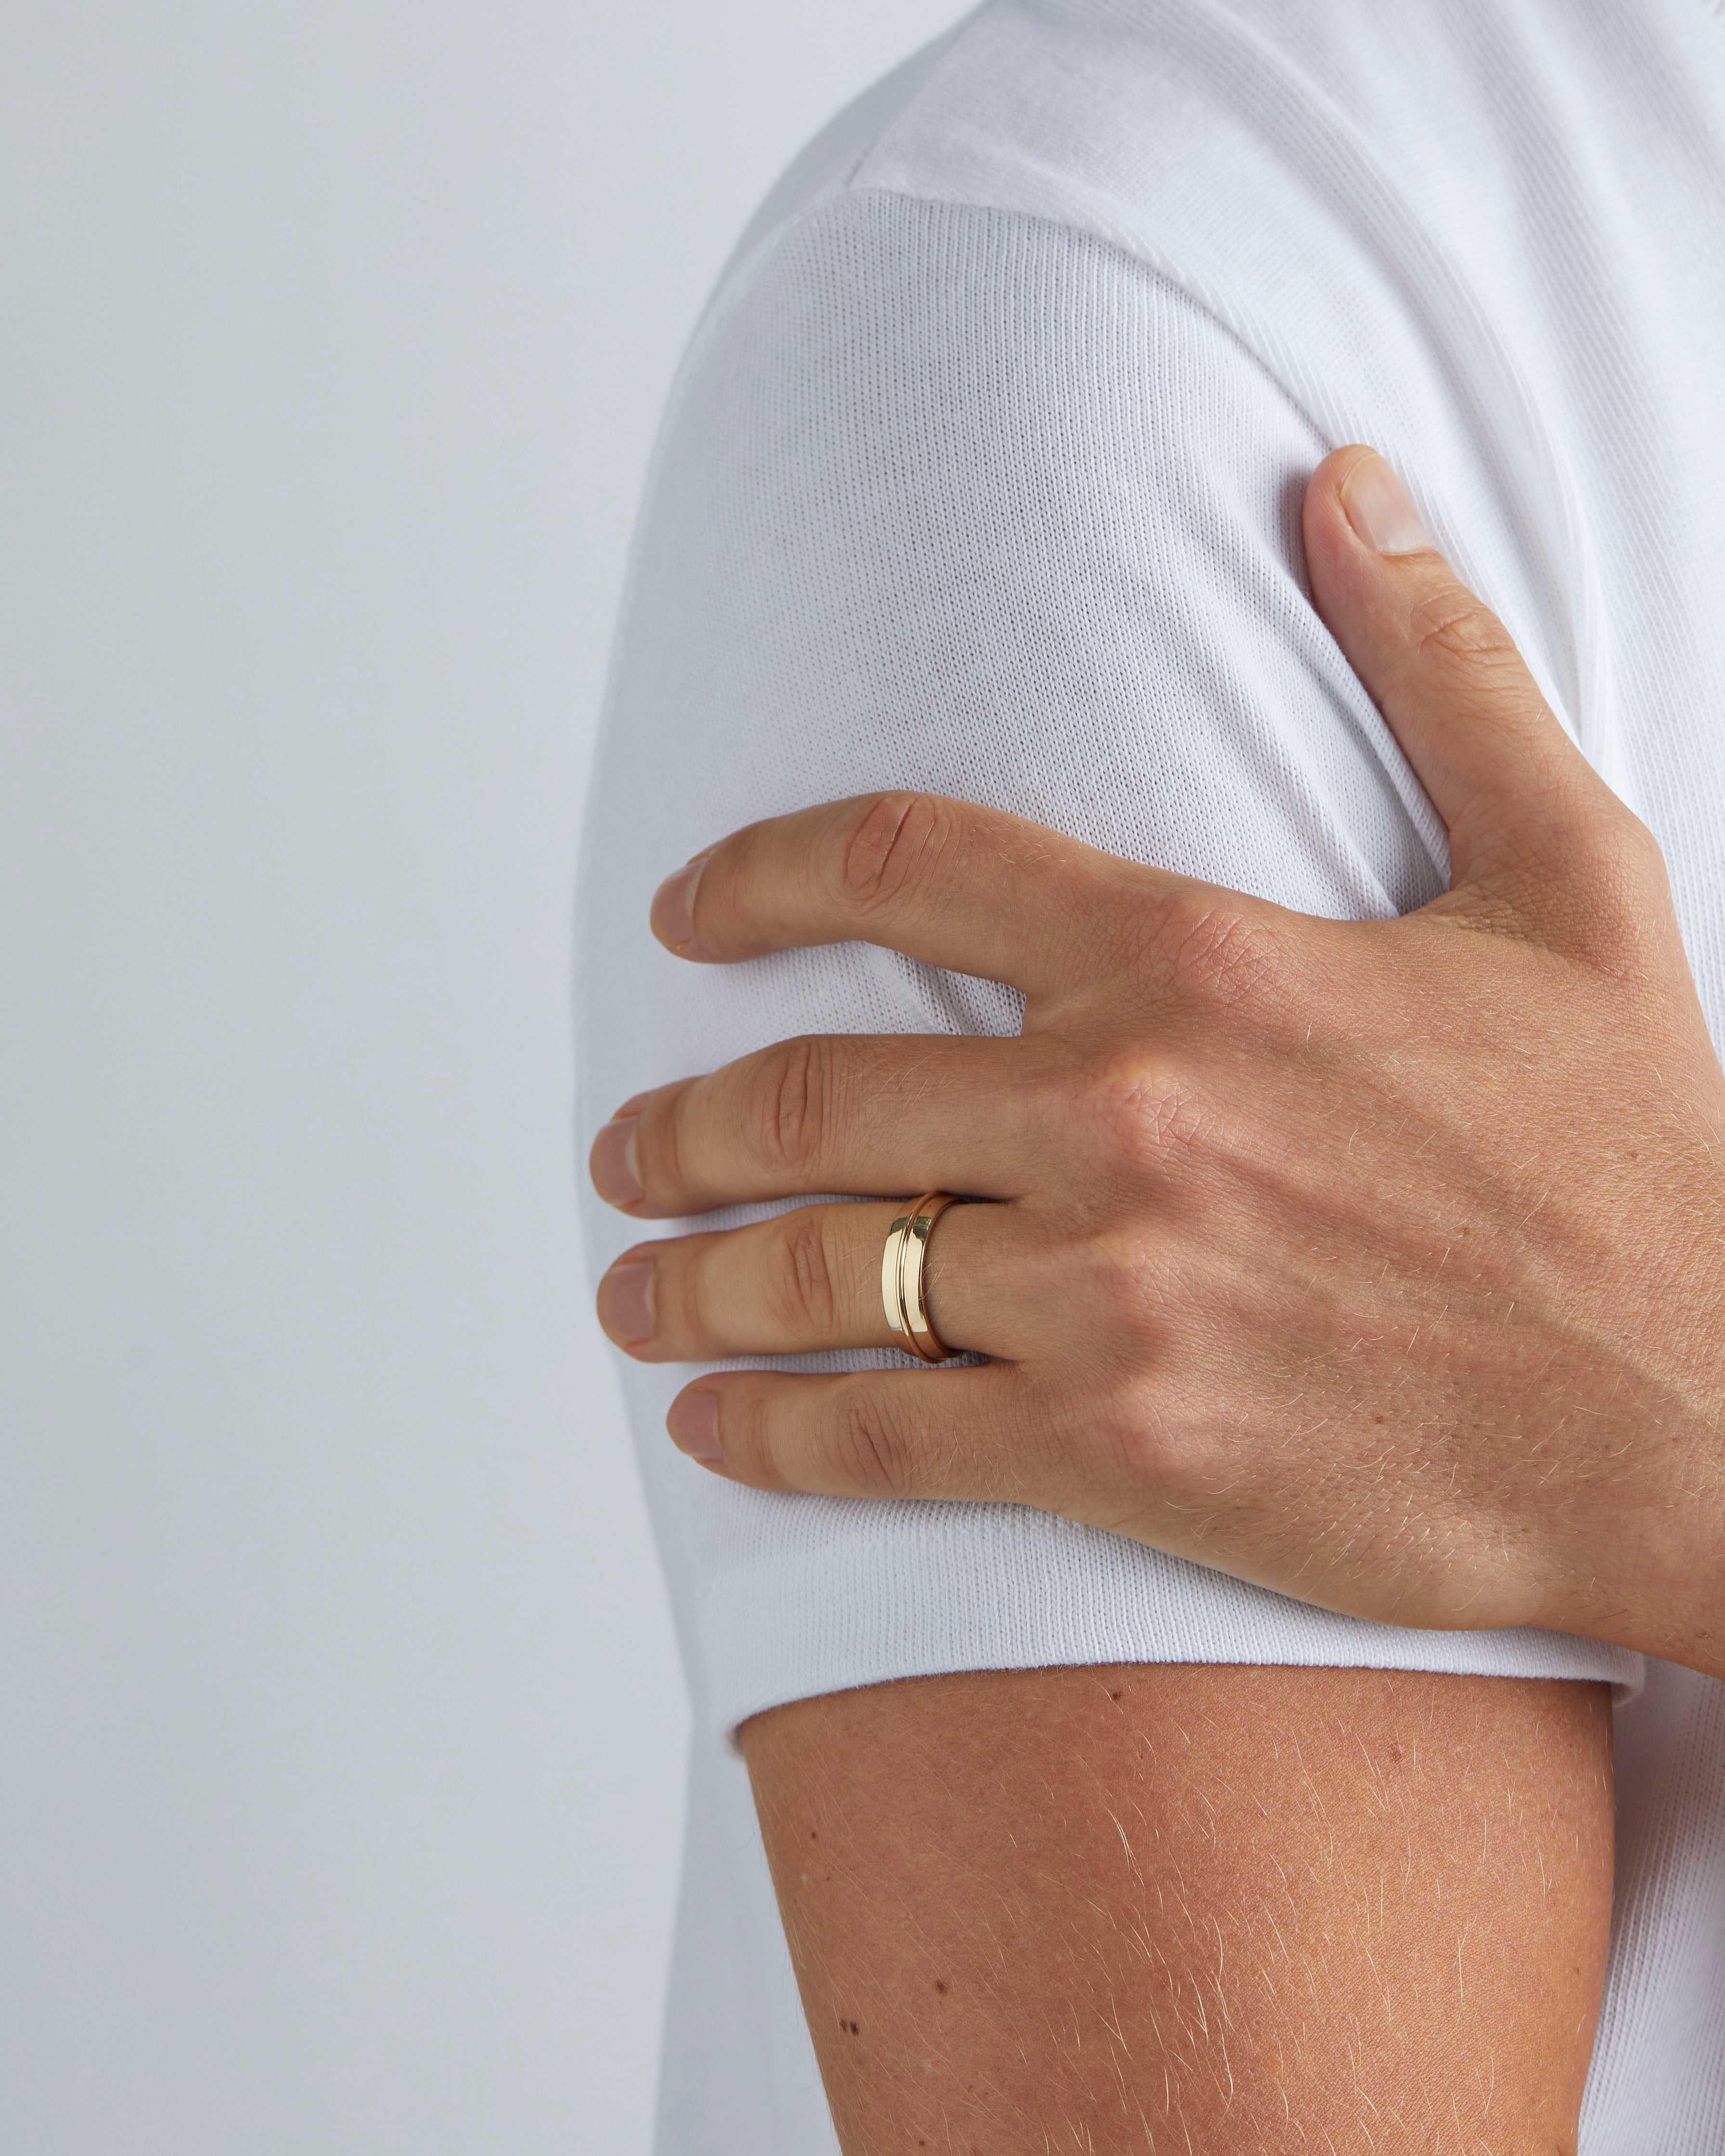 A model wears our 6mm seam wedding ring in yellow gold